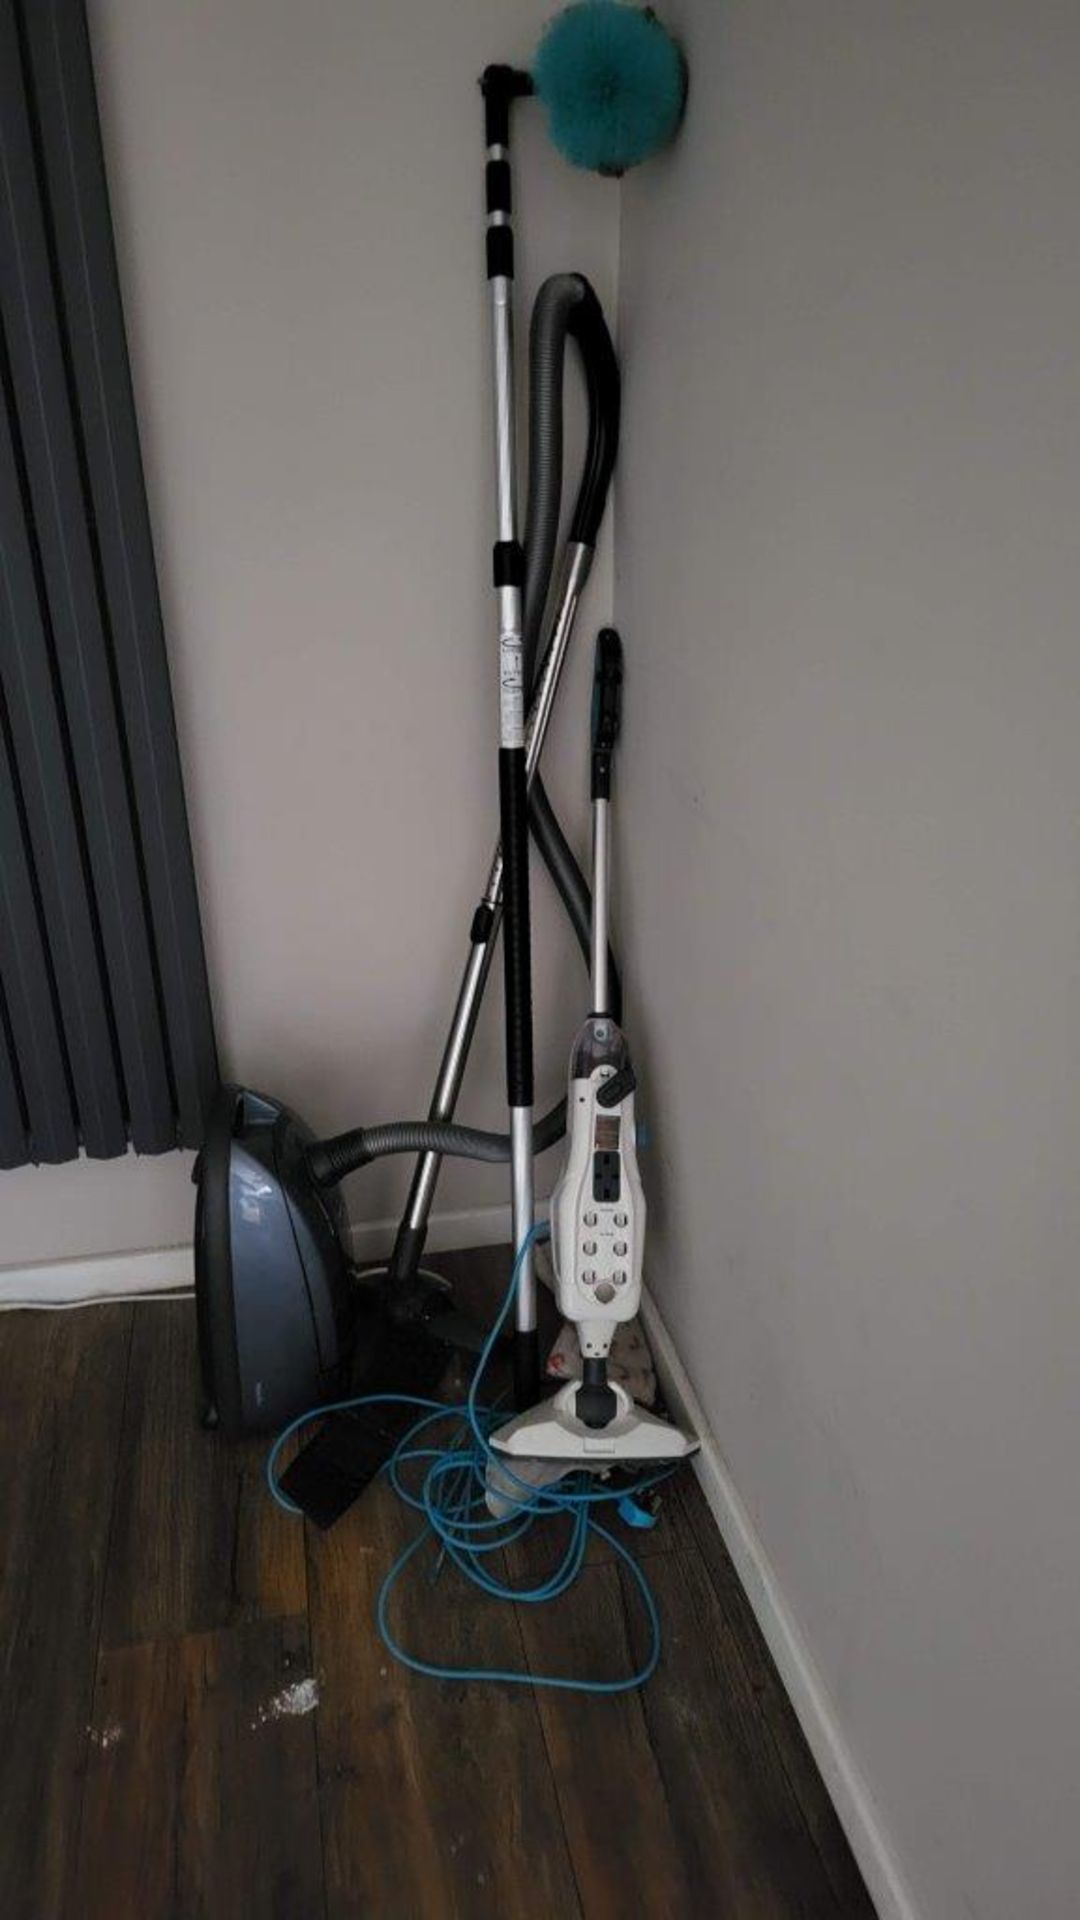 Vaccum Cleaner, Steam Mop and Duster